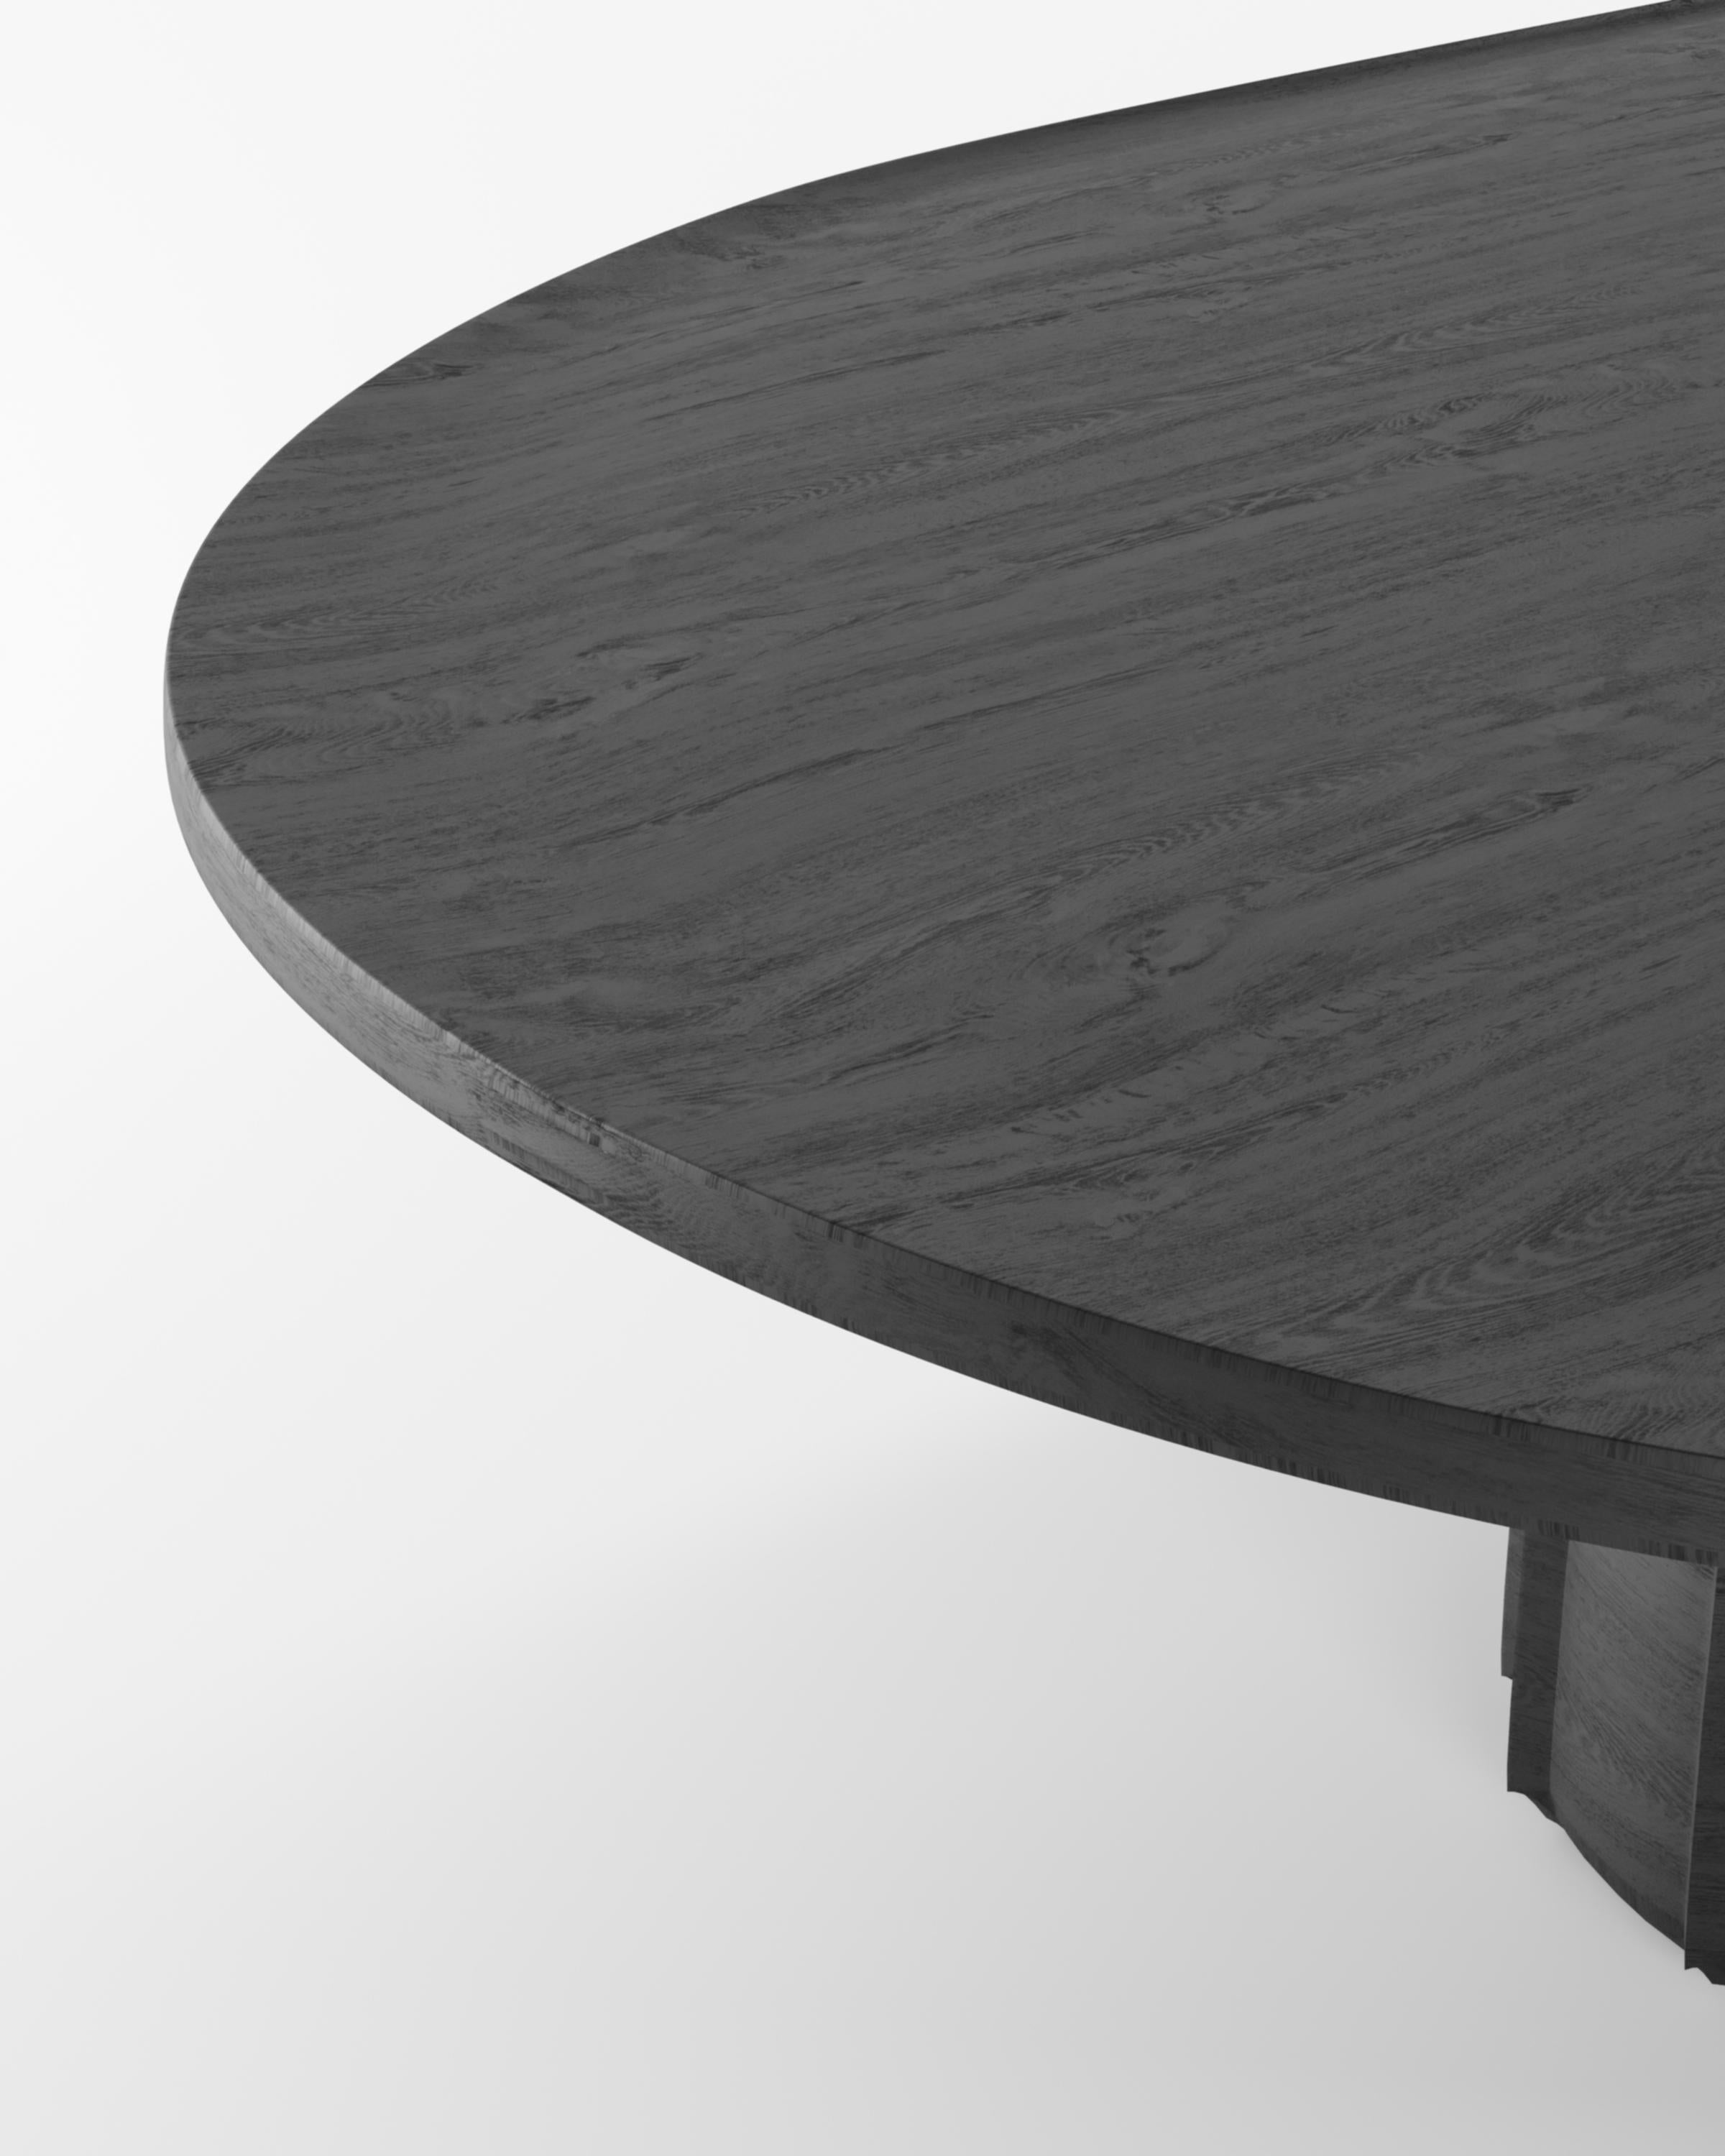 Collector- 21st Century Designed by Alter Ego Djembe Center Table Black Oak 



DIMENSIONS:
W 180 cm  70,8”
D 70 cm  27,5”
H 31 cm  12,2”


PRODUCT FEATURES
Oak

PRODUCT OPTIONS
Available in all COLLECTOR wood swatches
Available to be lacquered in